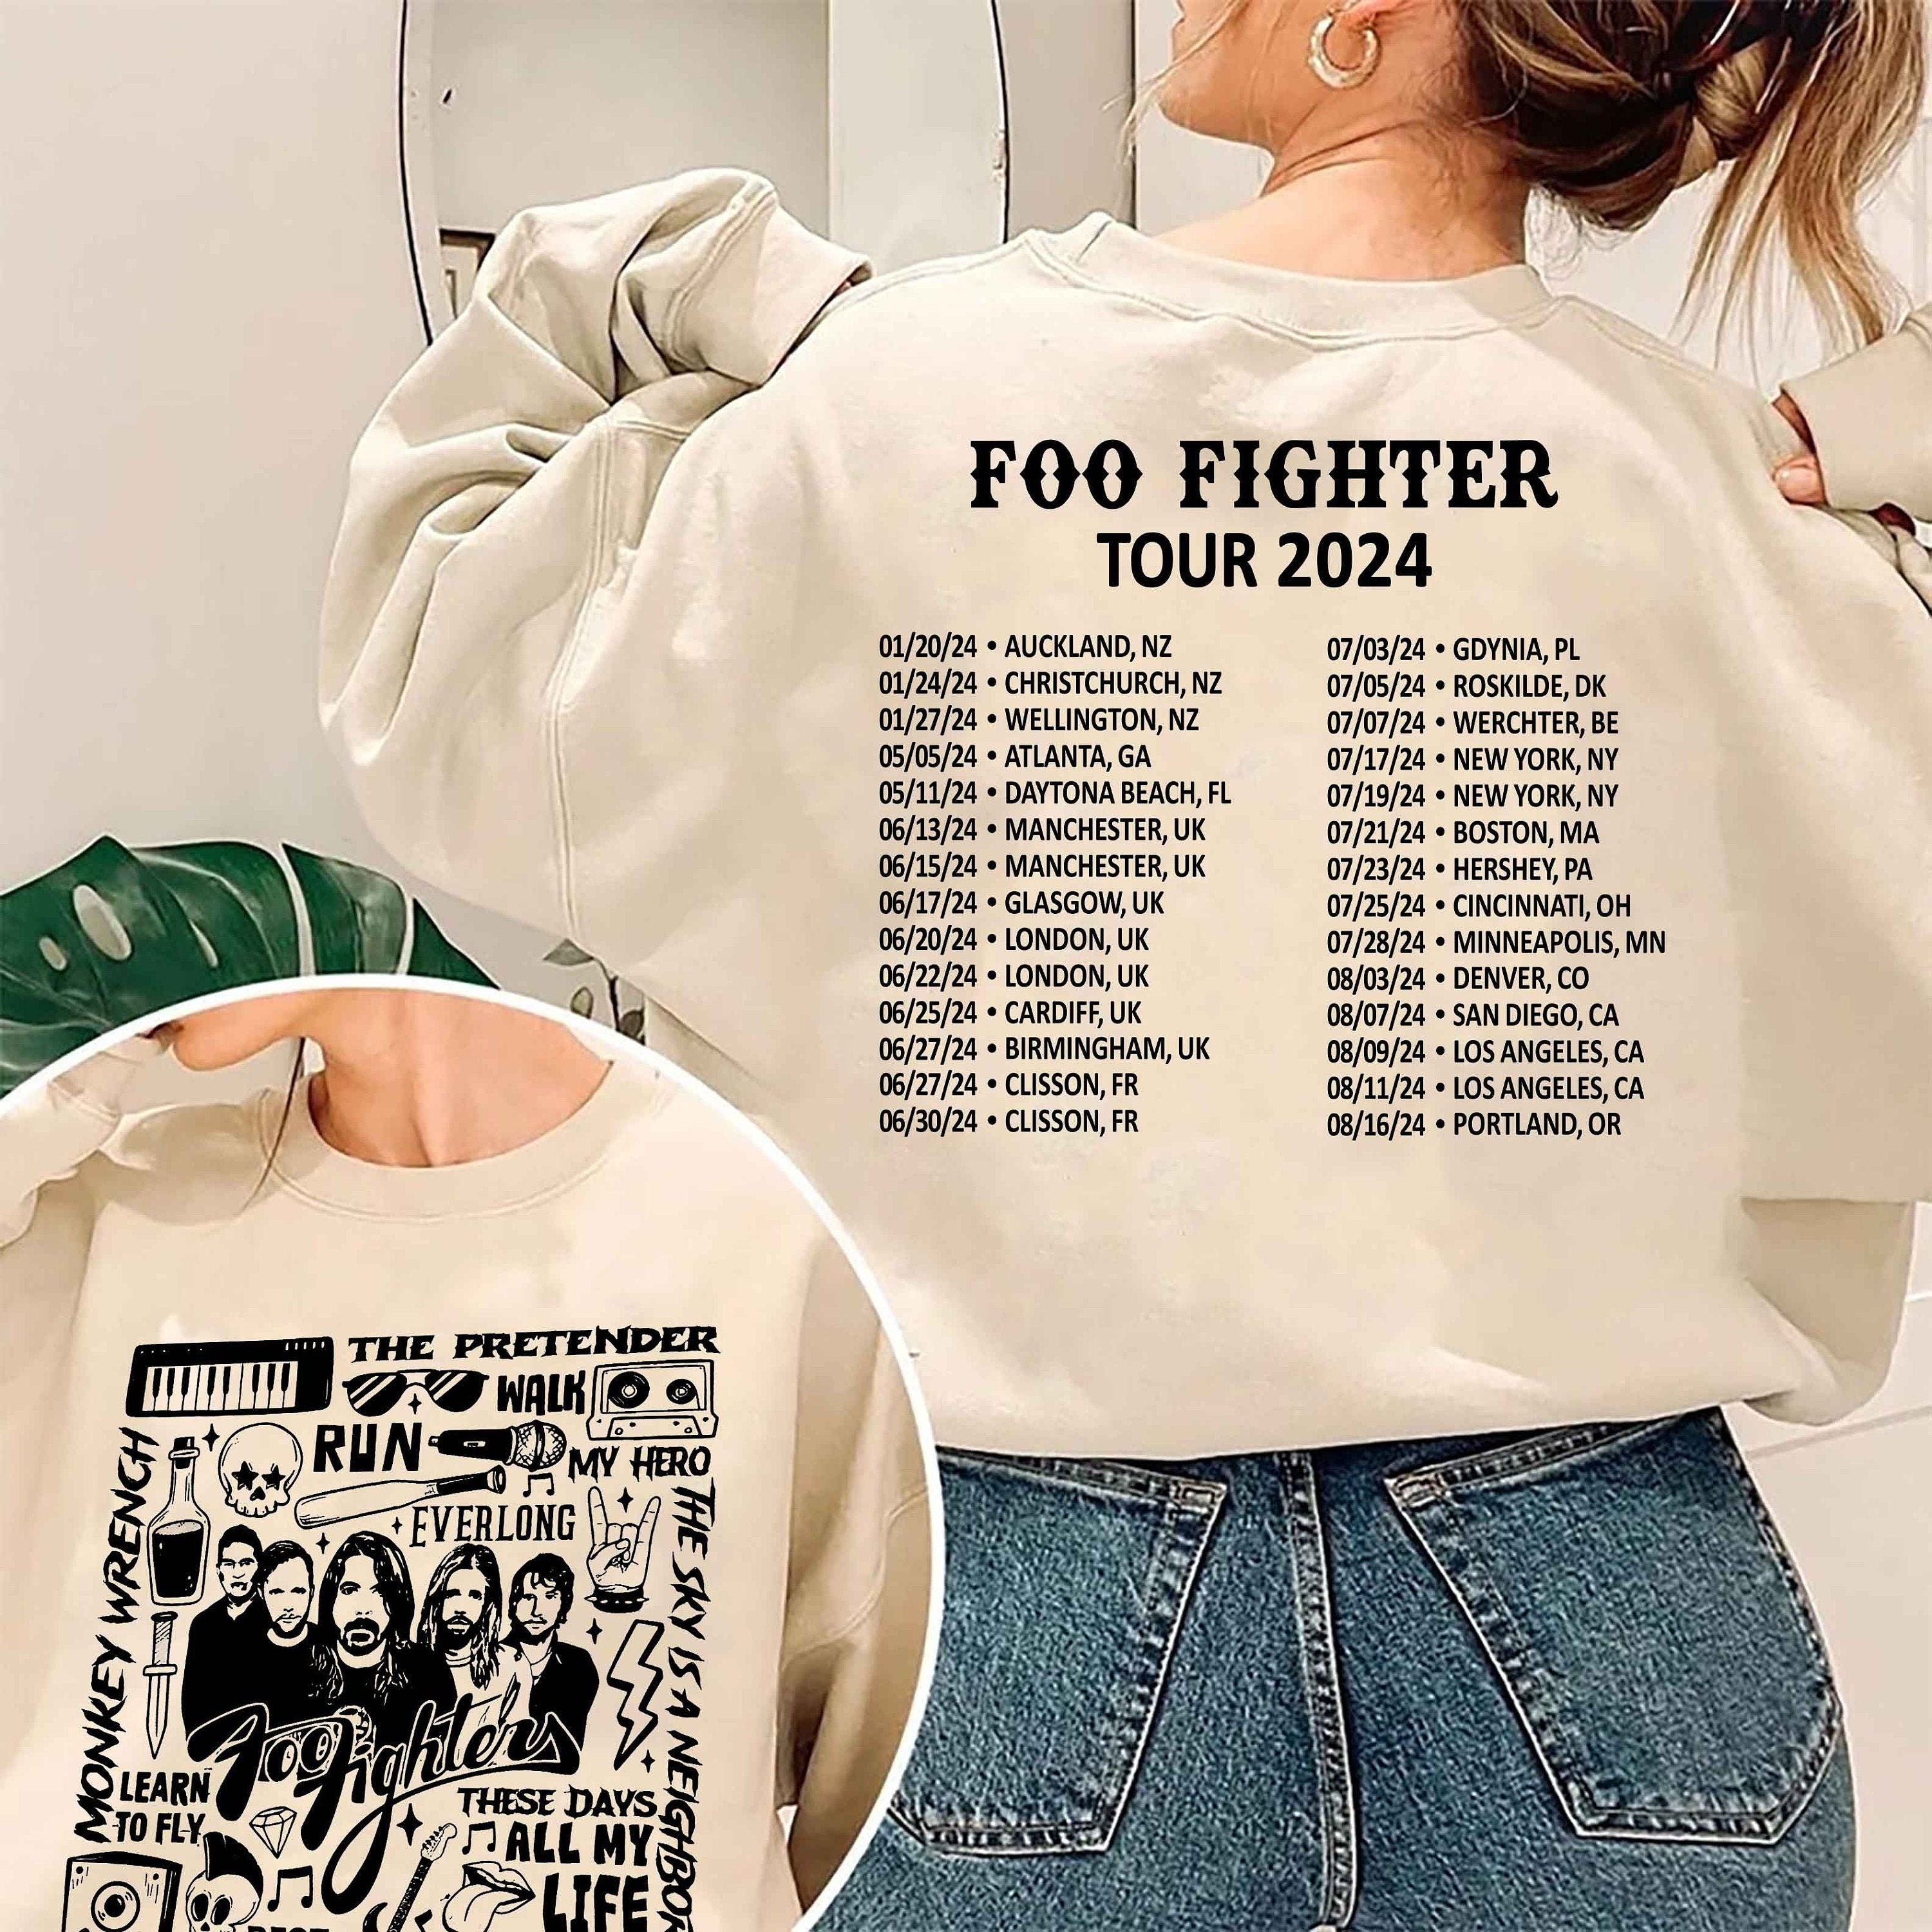 FF Band Fighters Tour 2024 Shirt, FF Band Fighters Sweatshirt